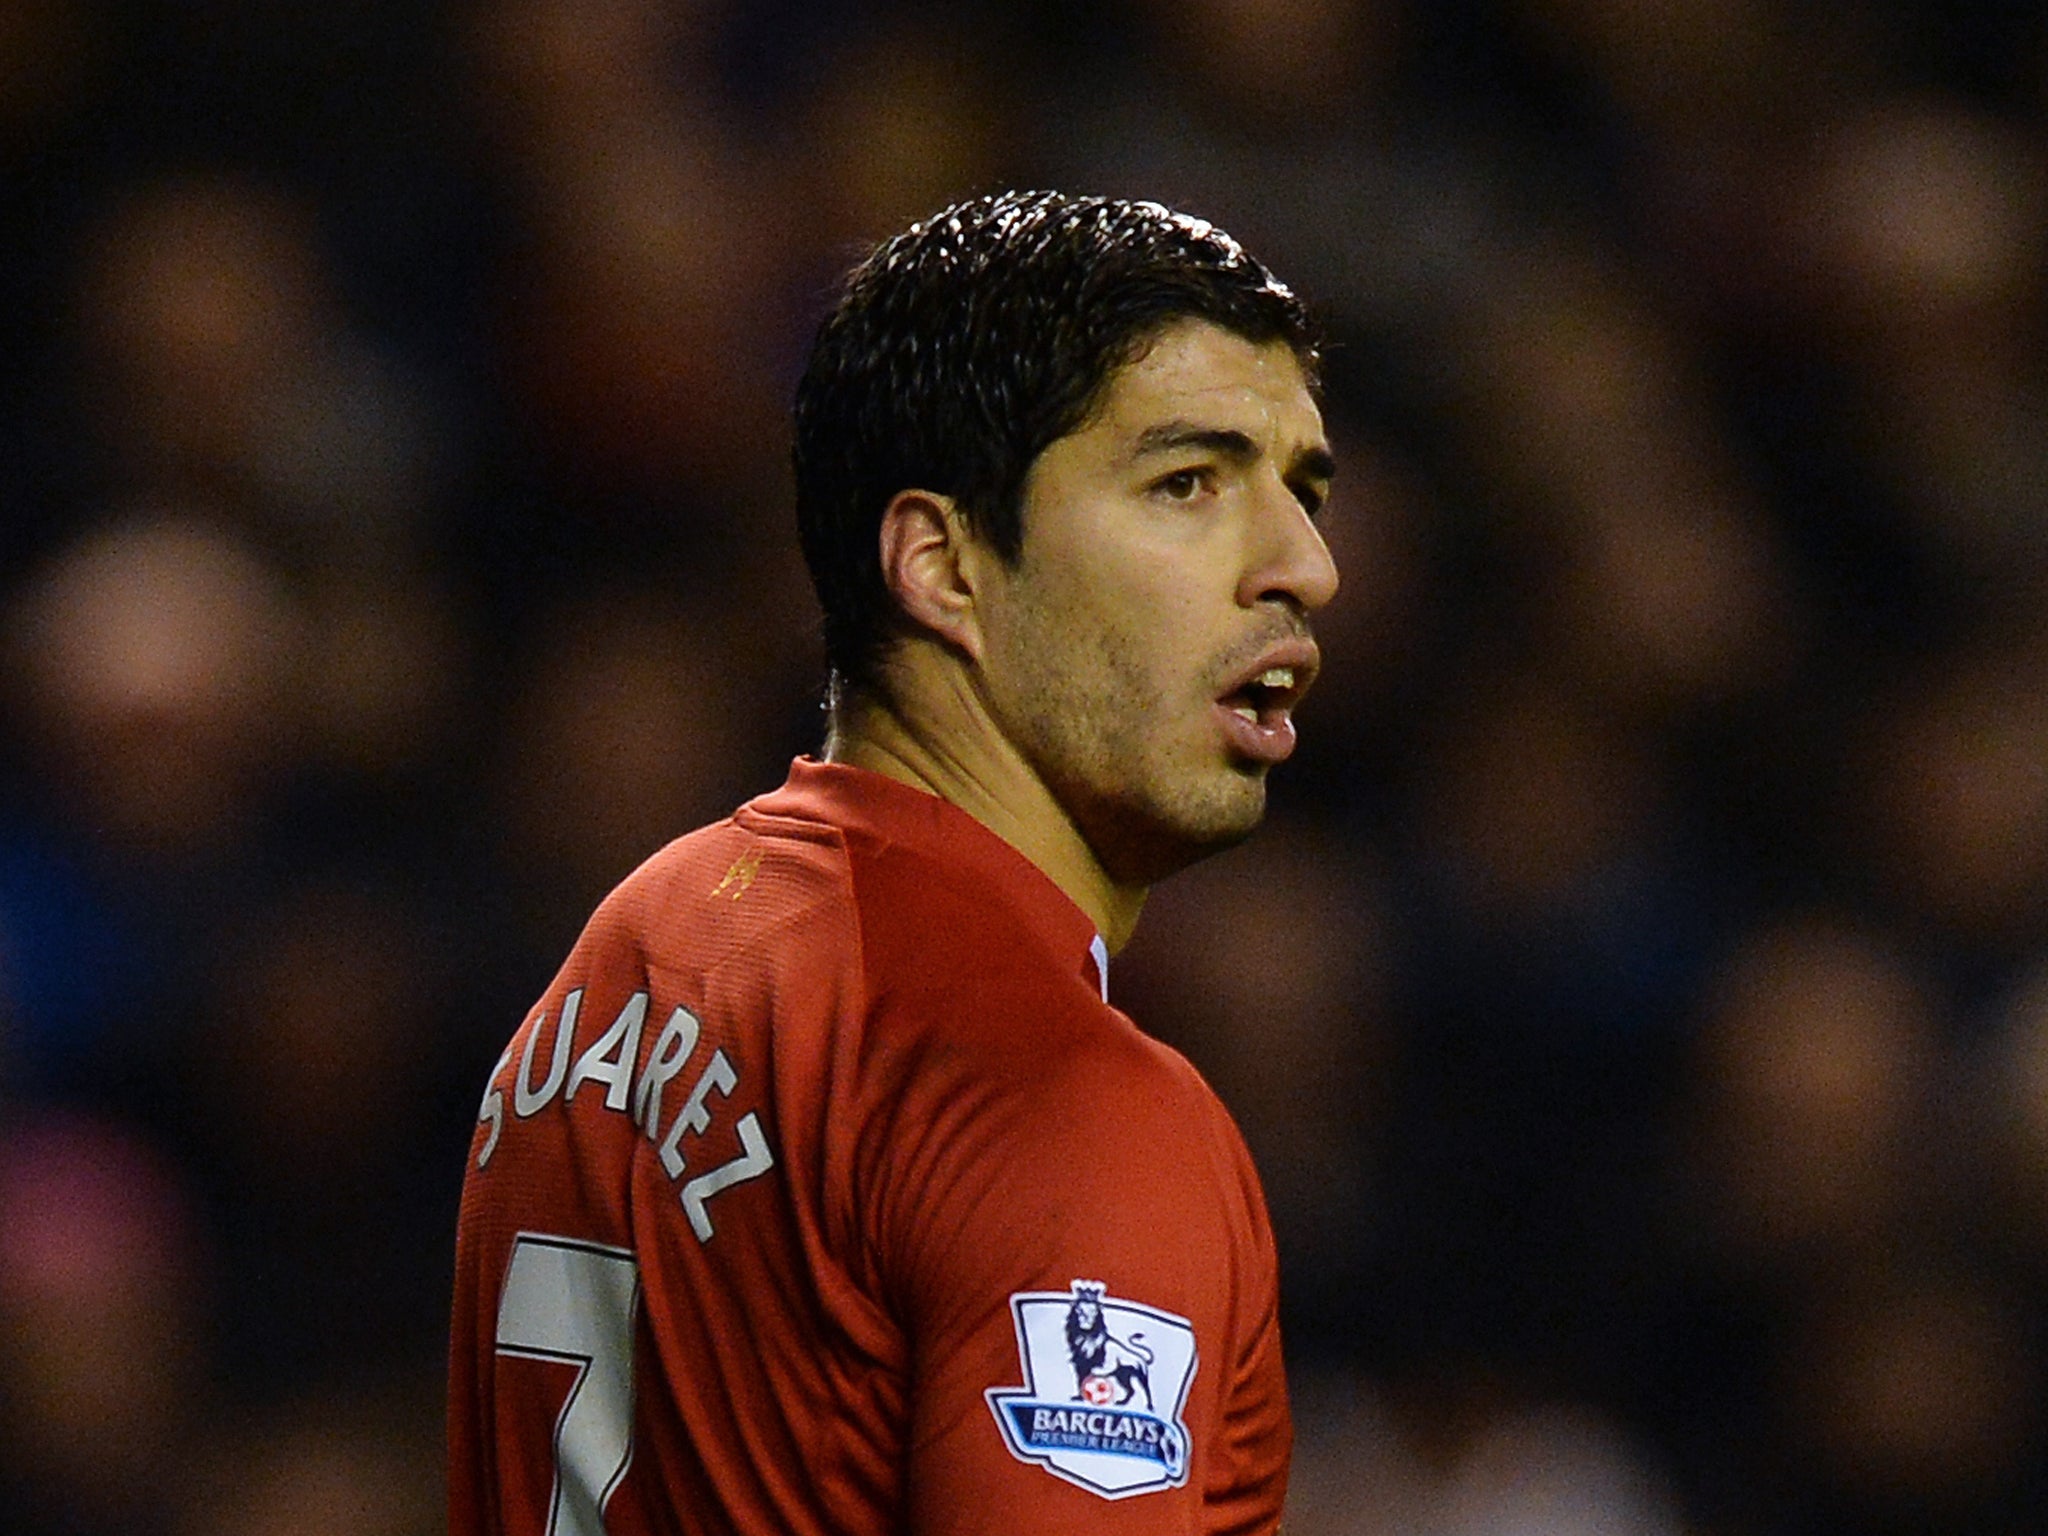 Luis Suarez was at the centre of a diving row following the 2-2 draw between Liverpool and Aston Villa